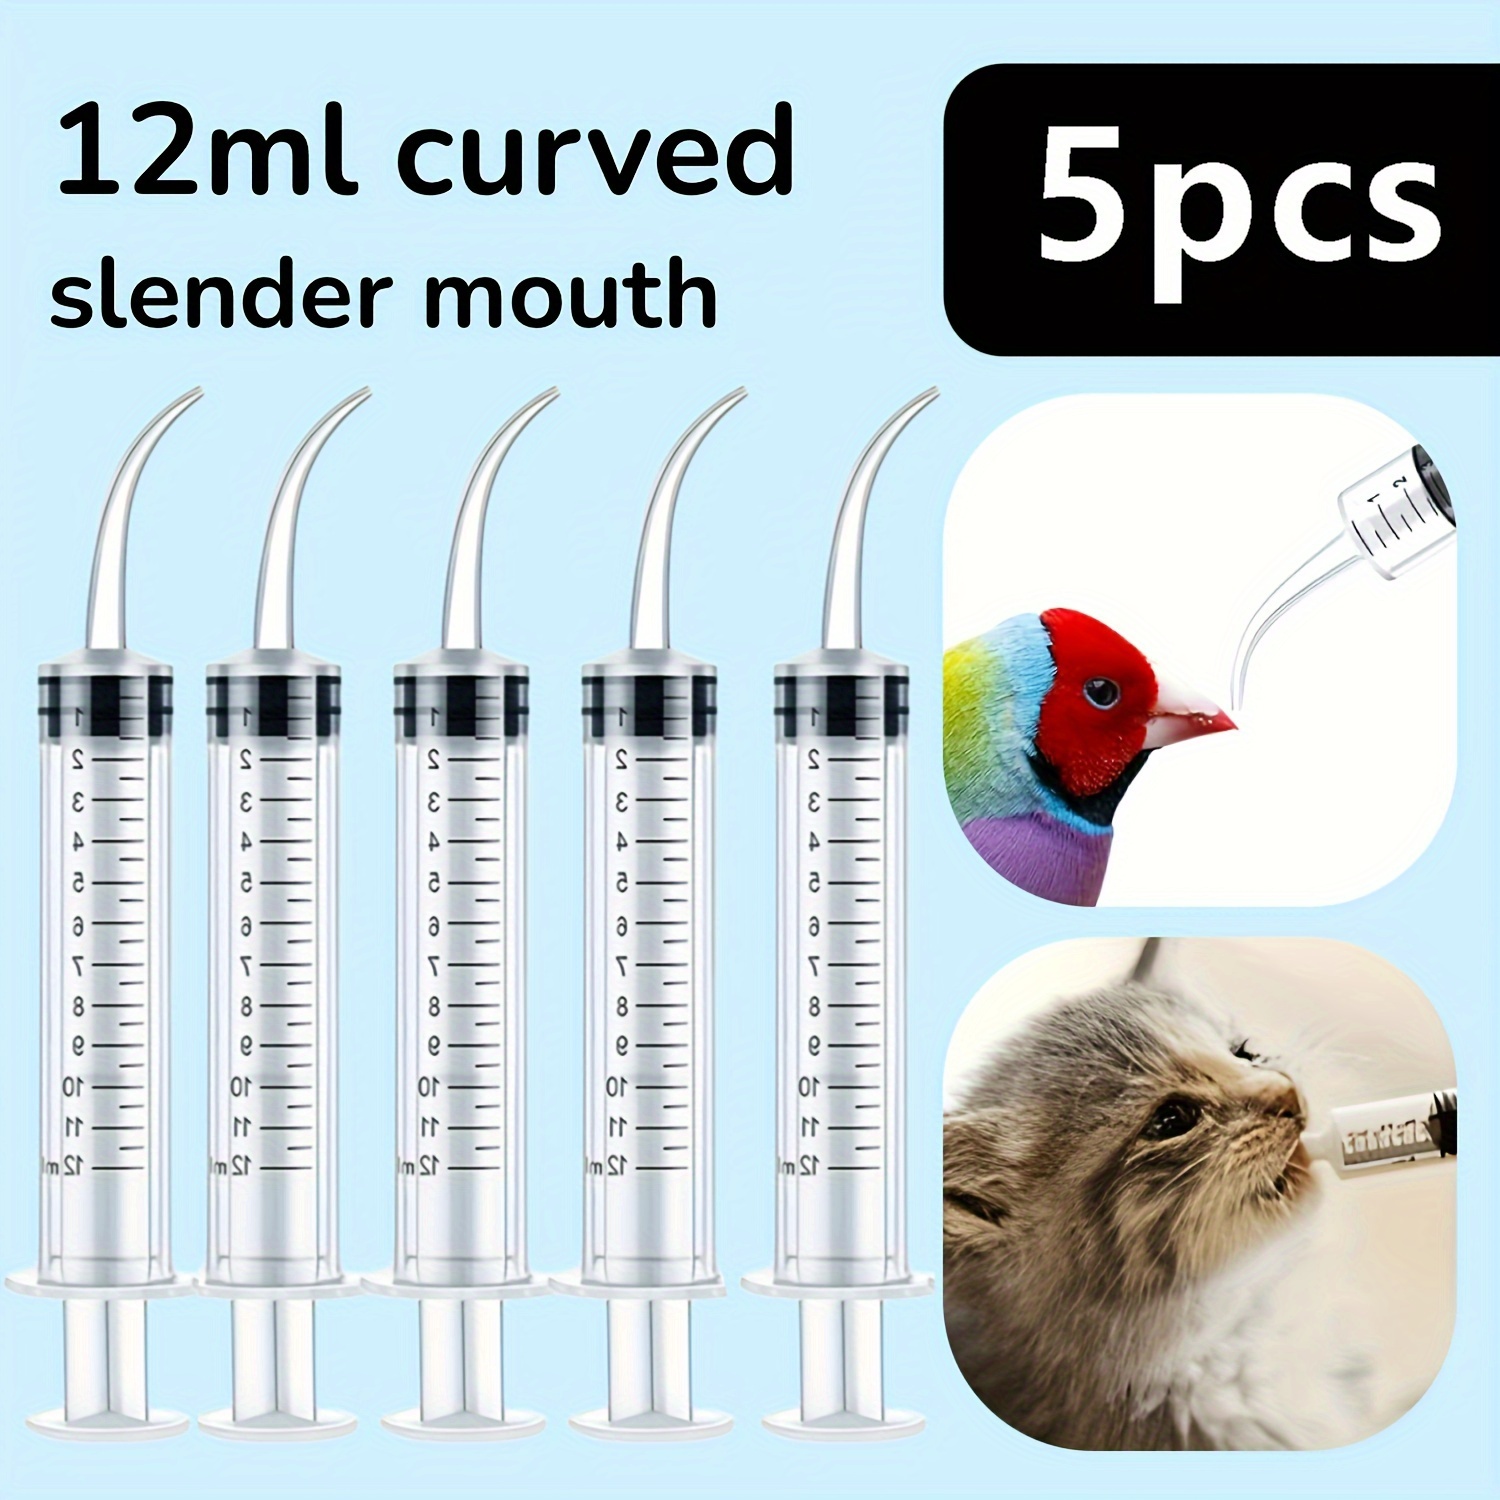 

5pcs Curved Tip Syringes For Birds Feeding, Pet Nursing, Medicine Dispensing, Plastic Syringe Without Needle With Measurement Scale And Sealing Plunger